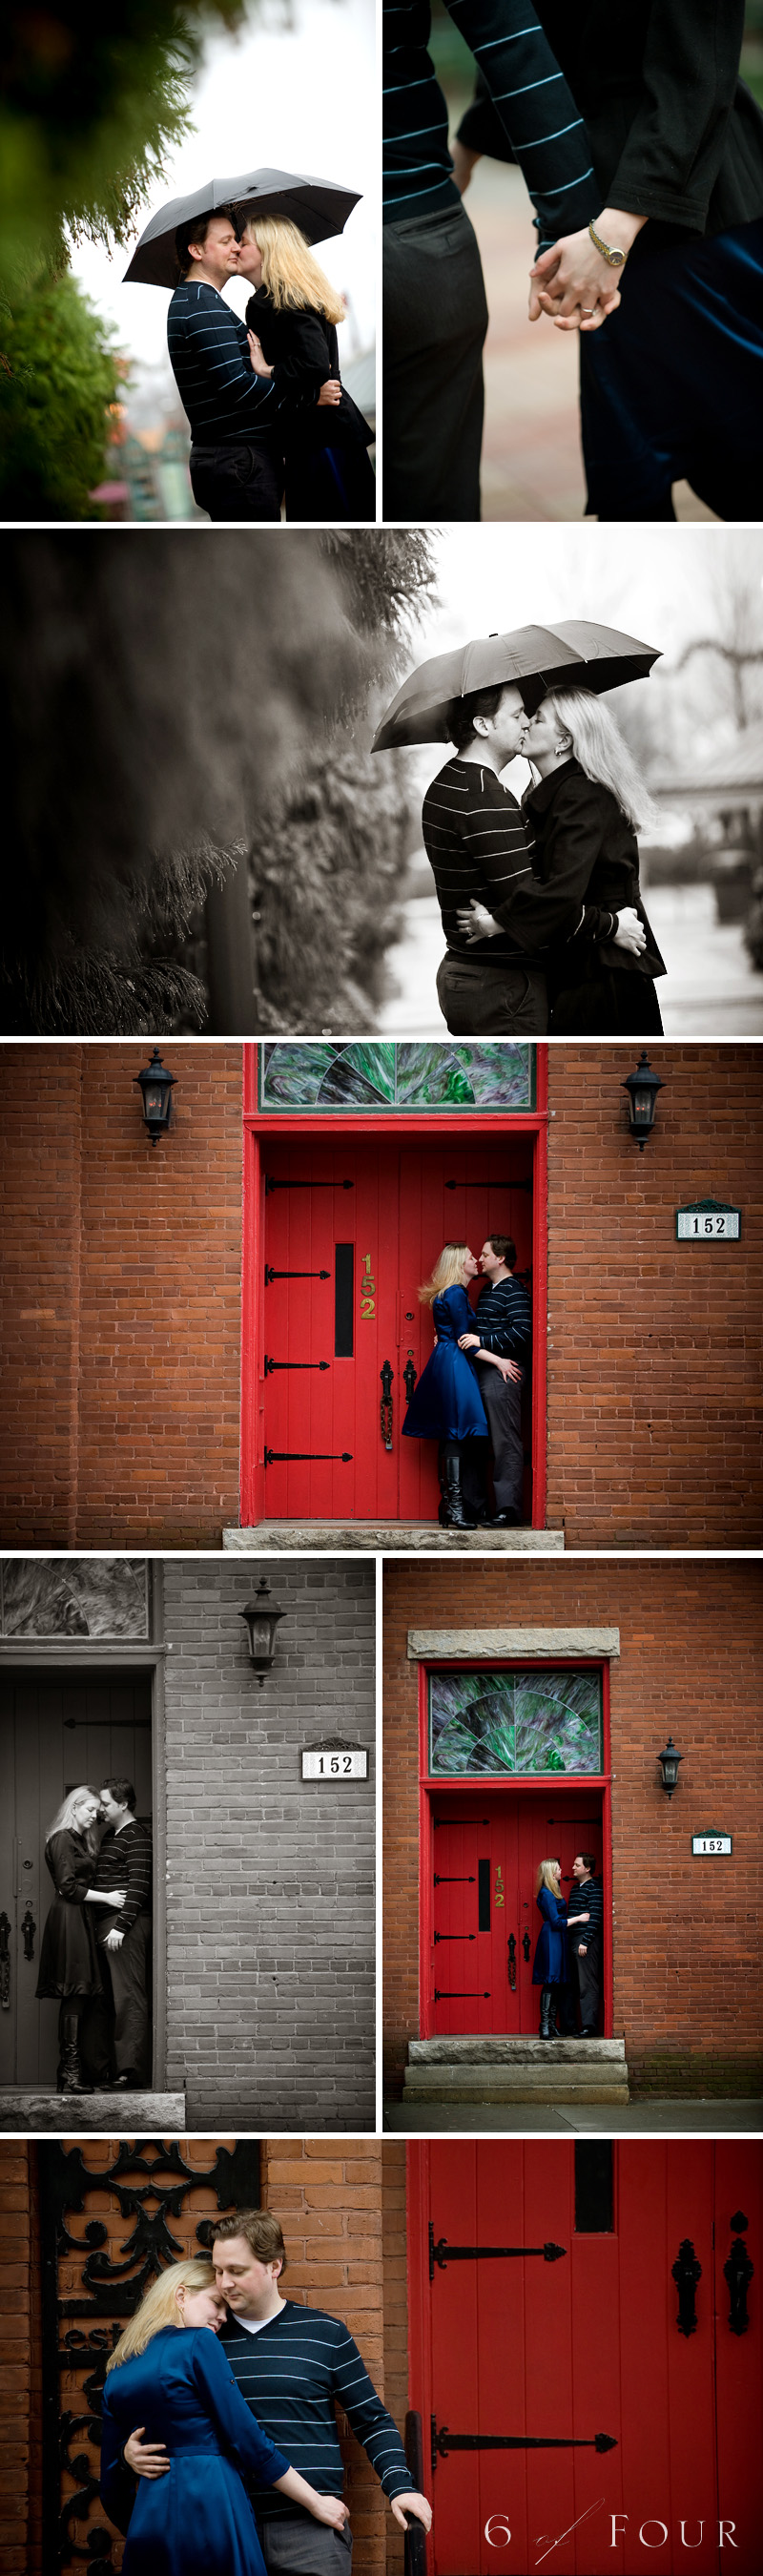 Erica & Matt engagement portrait session at Centennial Olympic Park and the Tabernacle